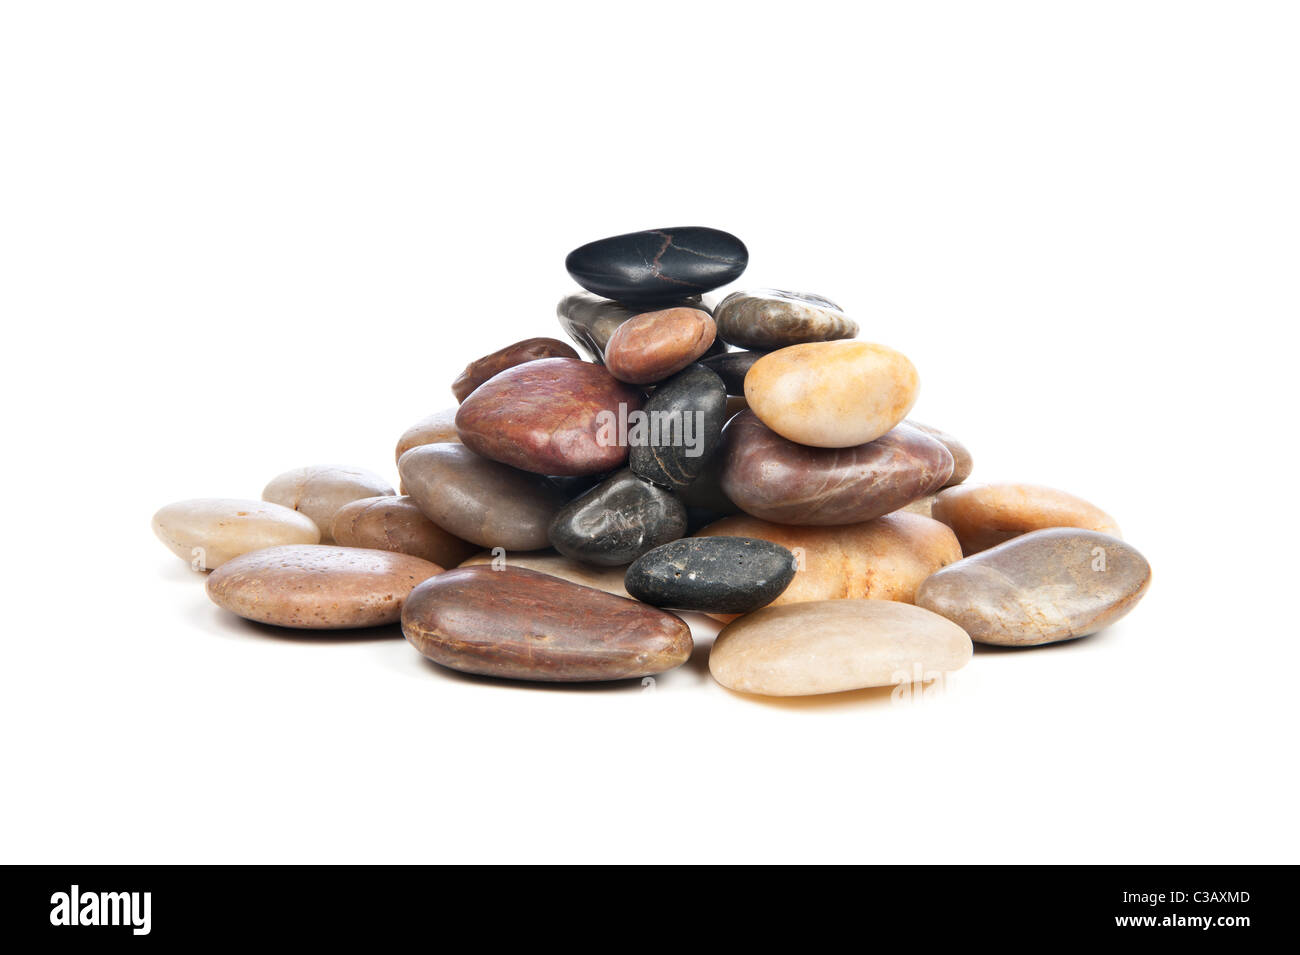 A pile of smooth, shiny river rocks on a white background. Stock Photo